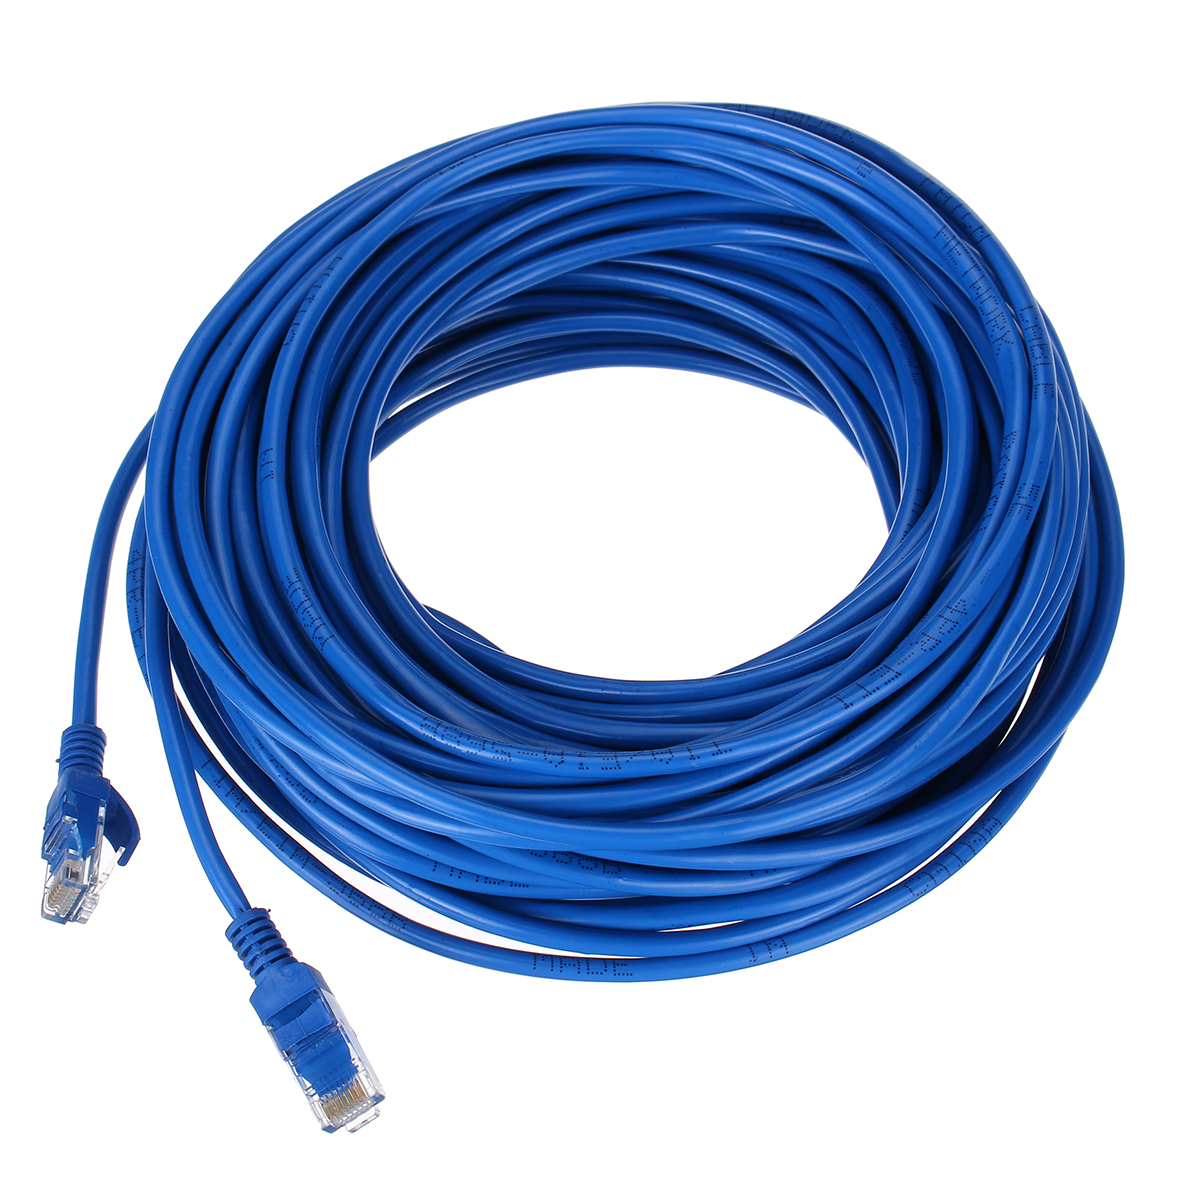 Fast-RJ-45---Male-To-Male-Network-Ethernet-LAN-Cable-Wire-10m15m20m30m50m-1567247-10